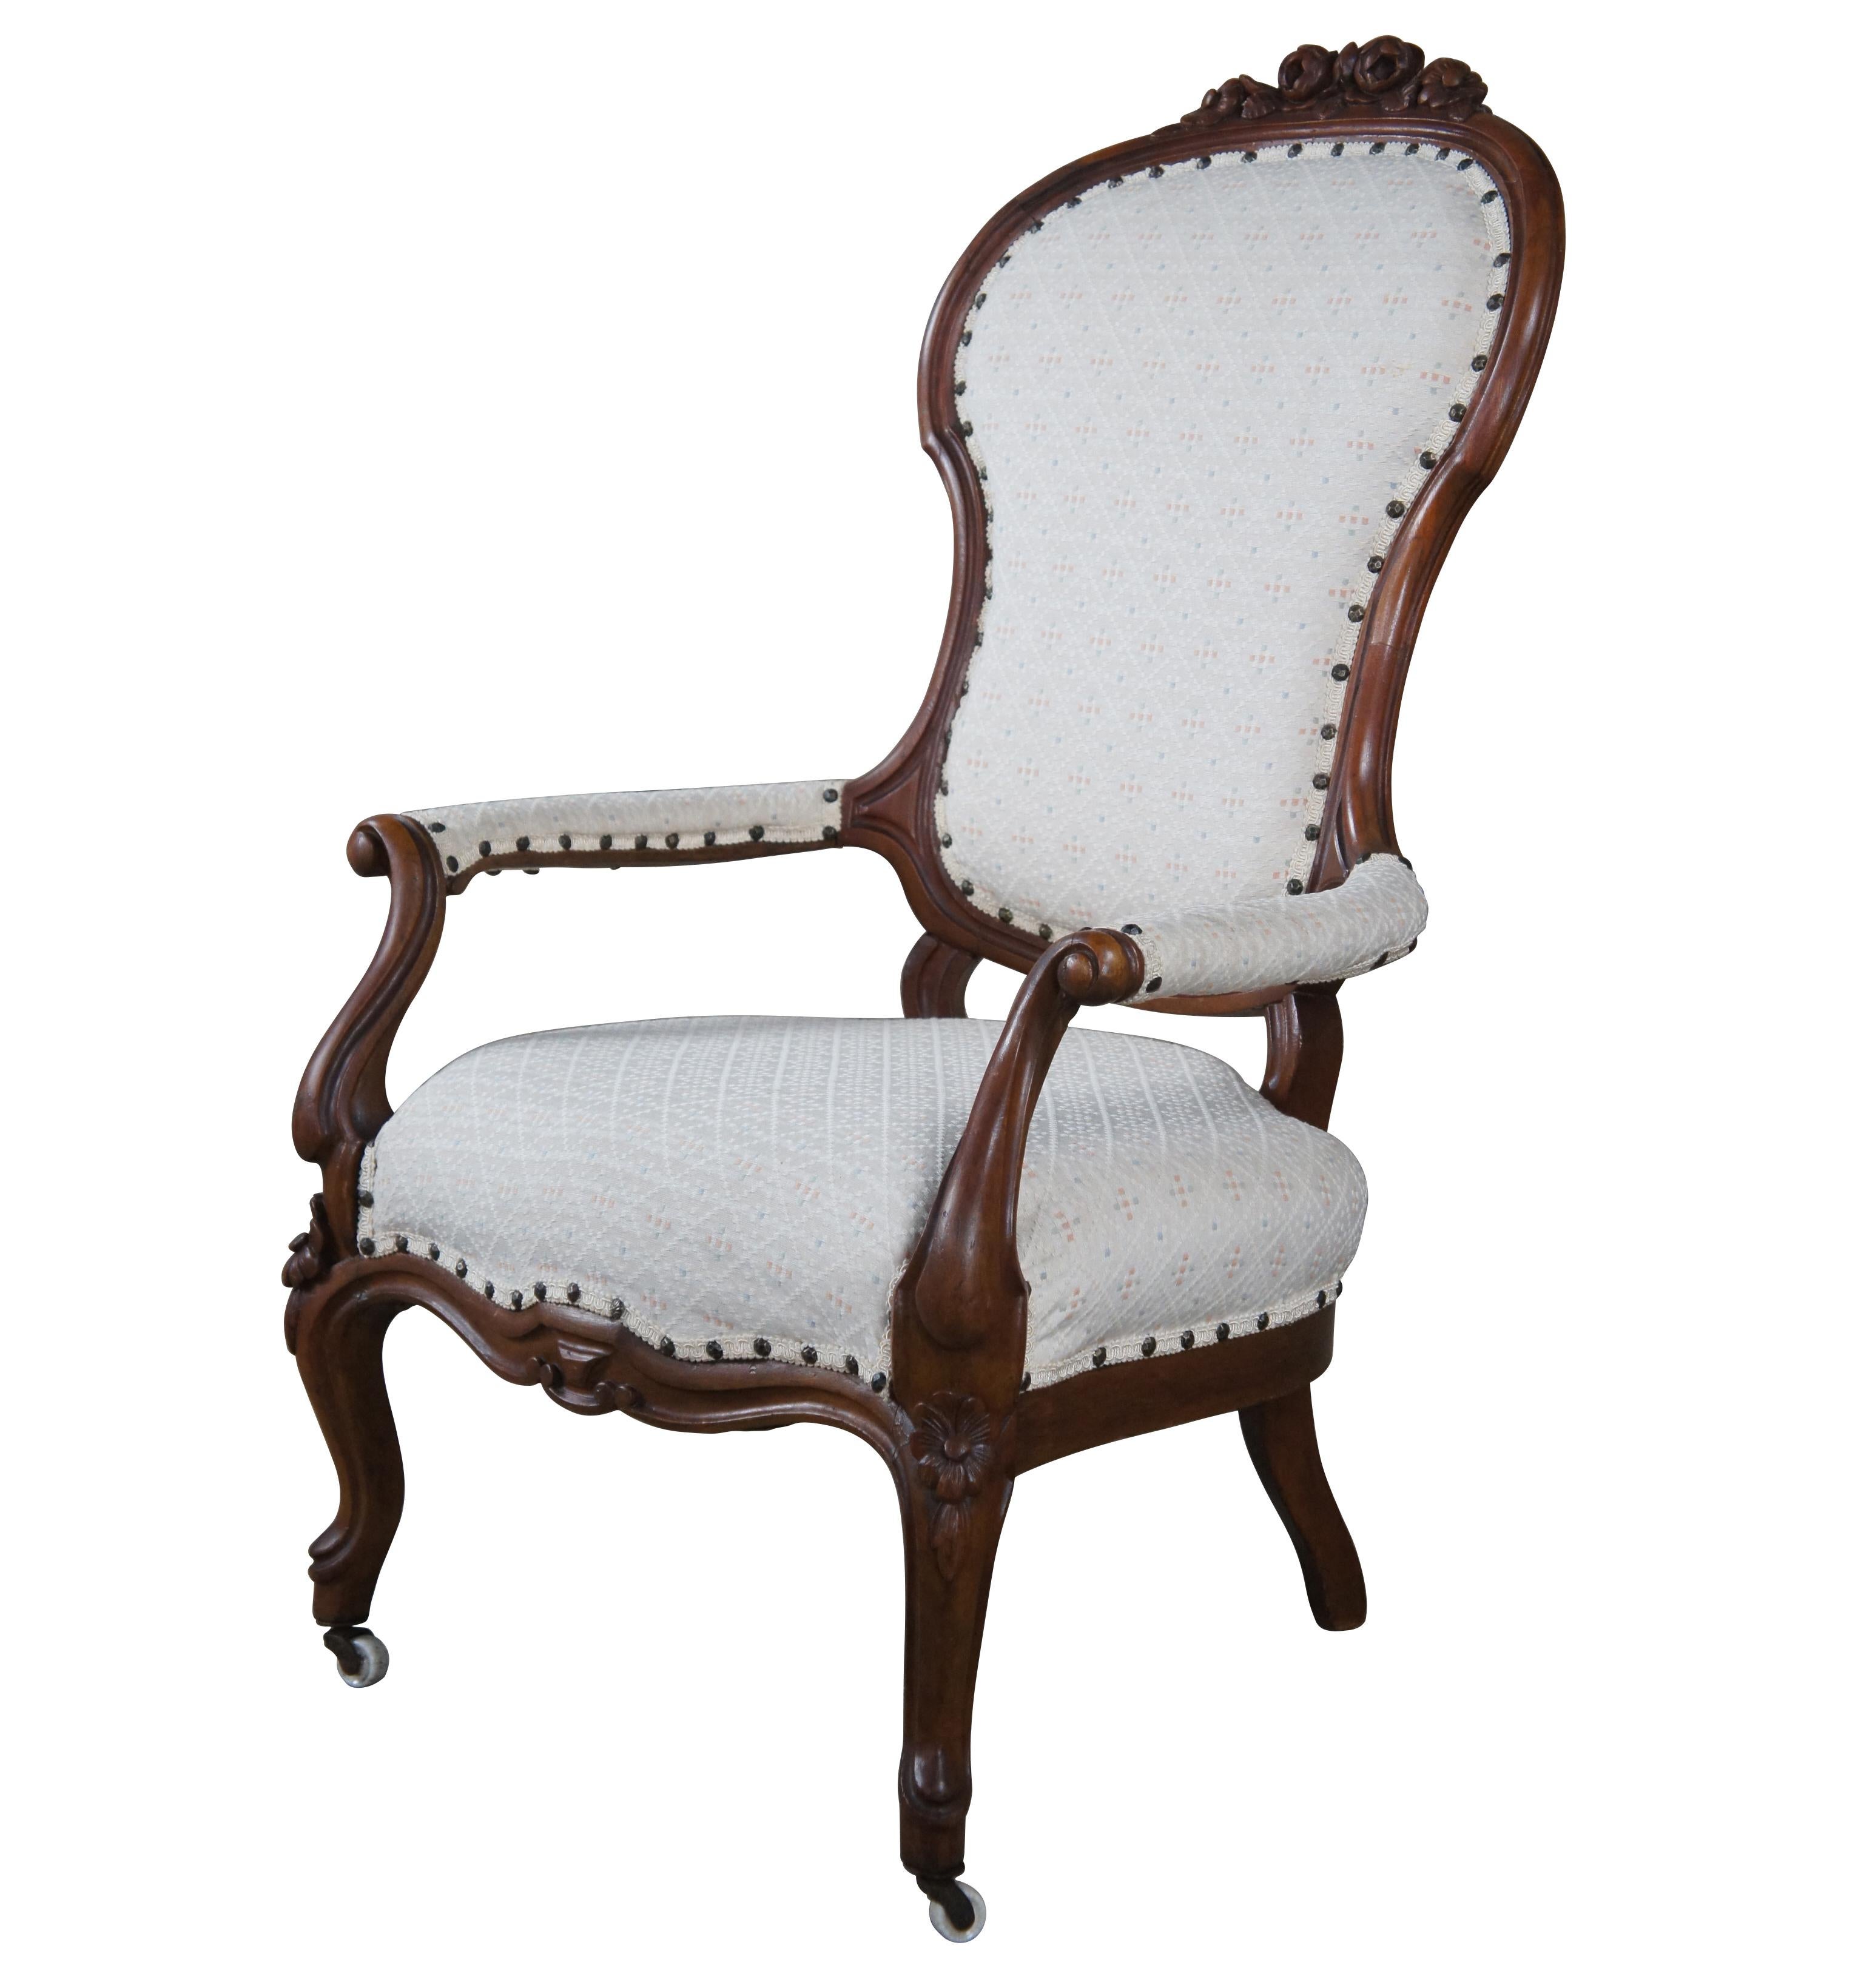 A lovely Victorian era spoon back arm chair. Made from walnut with flared and scrolled upholstered arms. Features daisy, rose and leaf carvings. The chair is raised over cabriole legs along the front with casters. Upholstery is white with a diamond